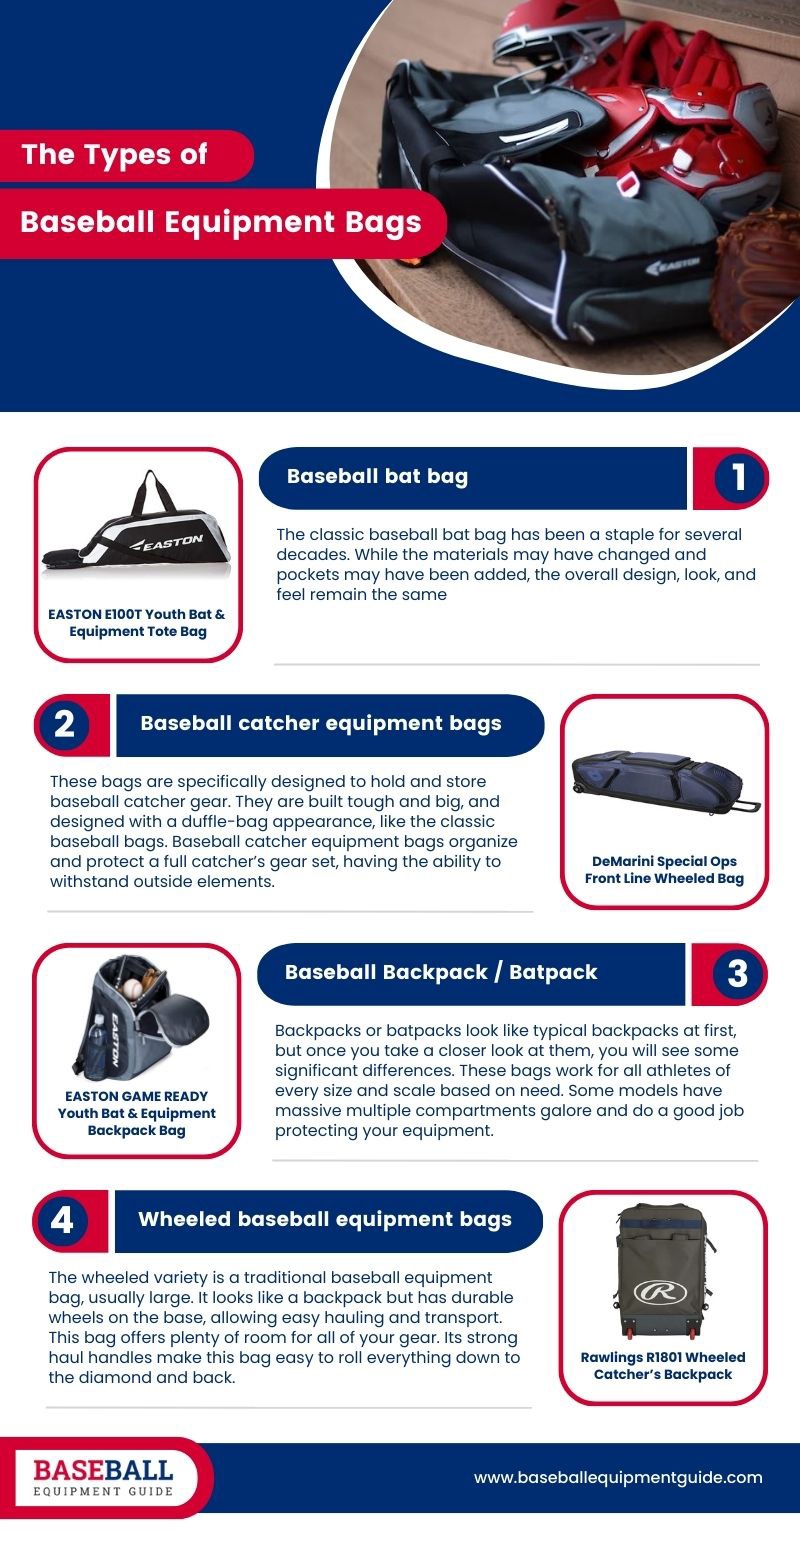 The Types of Baseball Equipment Bags